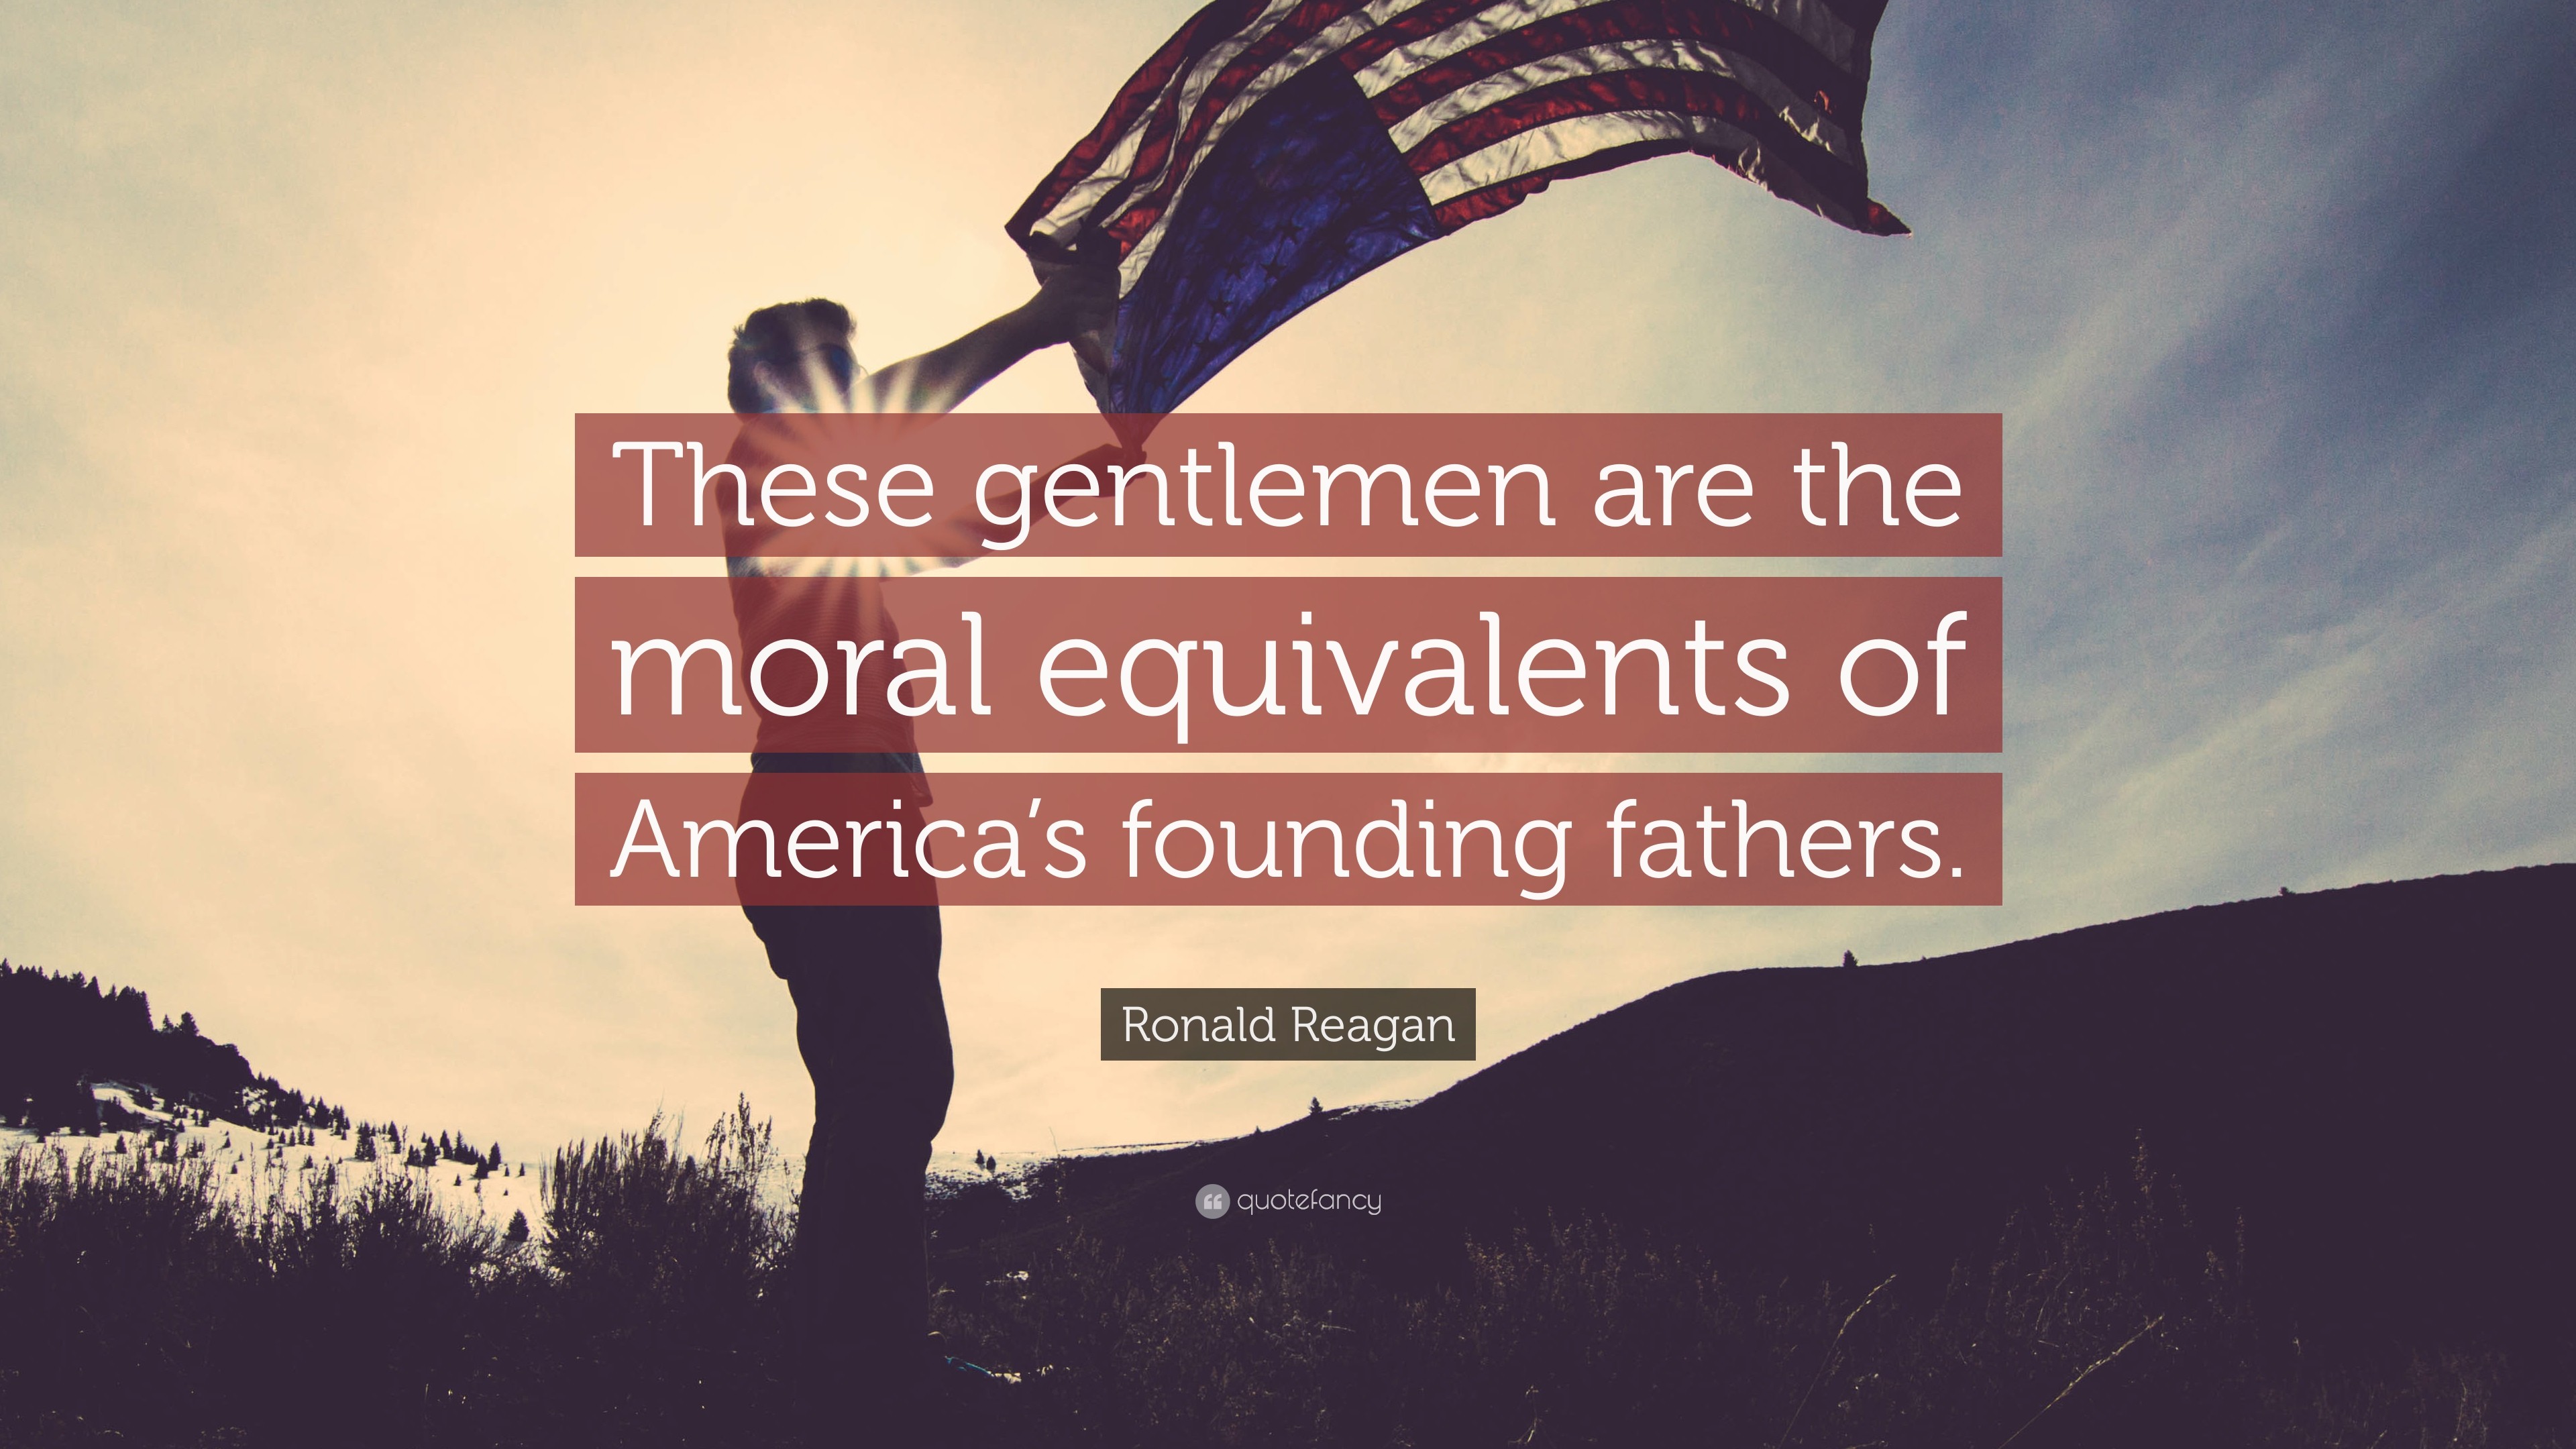 3840x2160 Ronald Reagan Quote: “These gentlemen are the moral equivalents of  America's founding fathers.